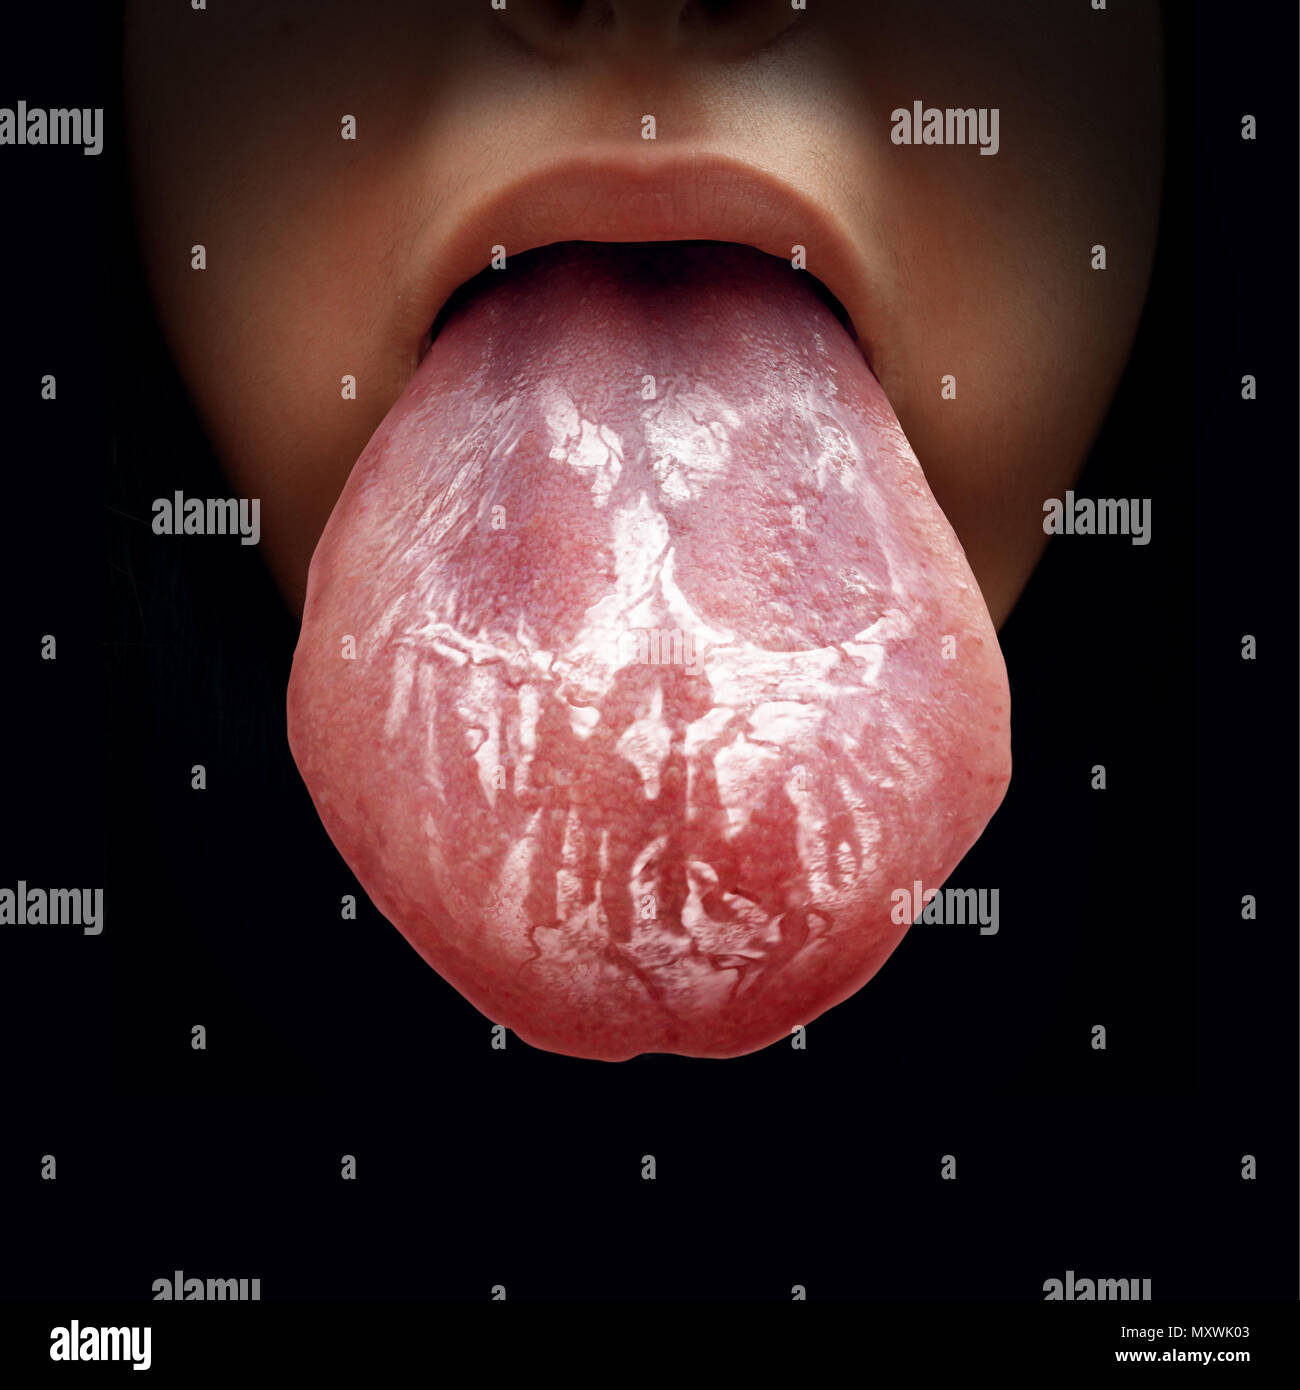 Tongue disease or oral thrush and candidiasis infectious disease of the inner mouth as the fungal illness shaped as a death skull as a medical. Stock Photo